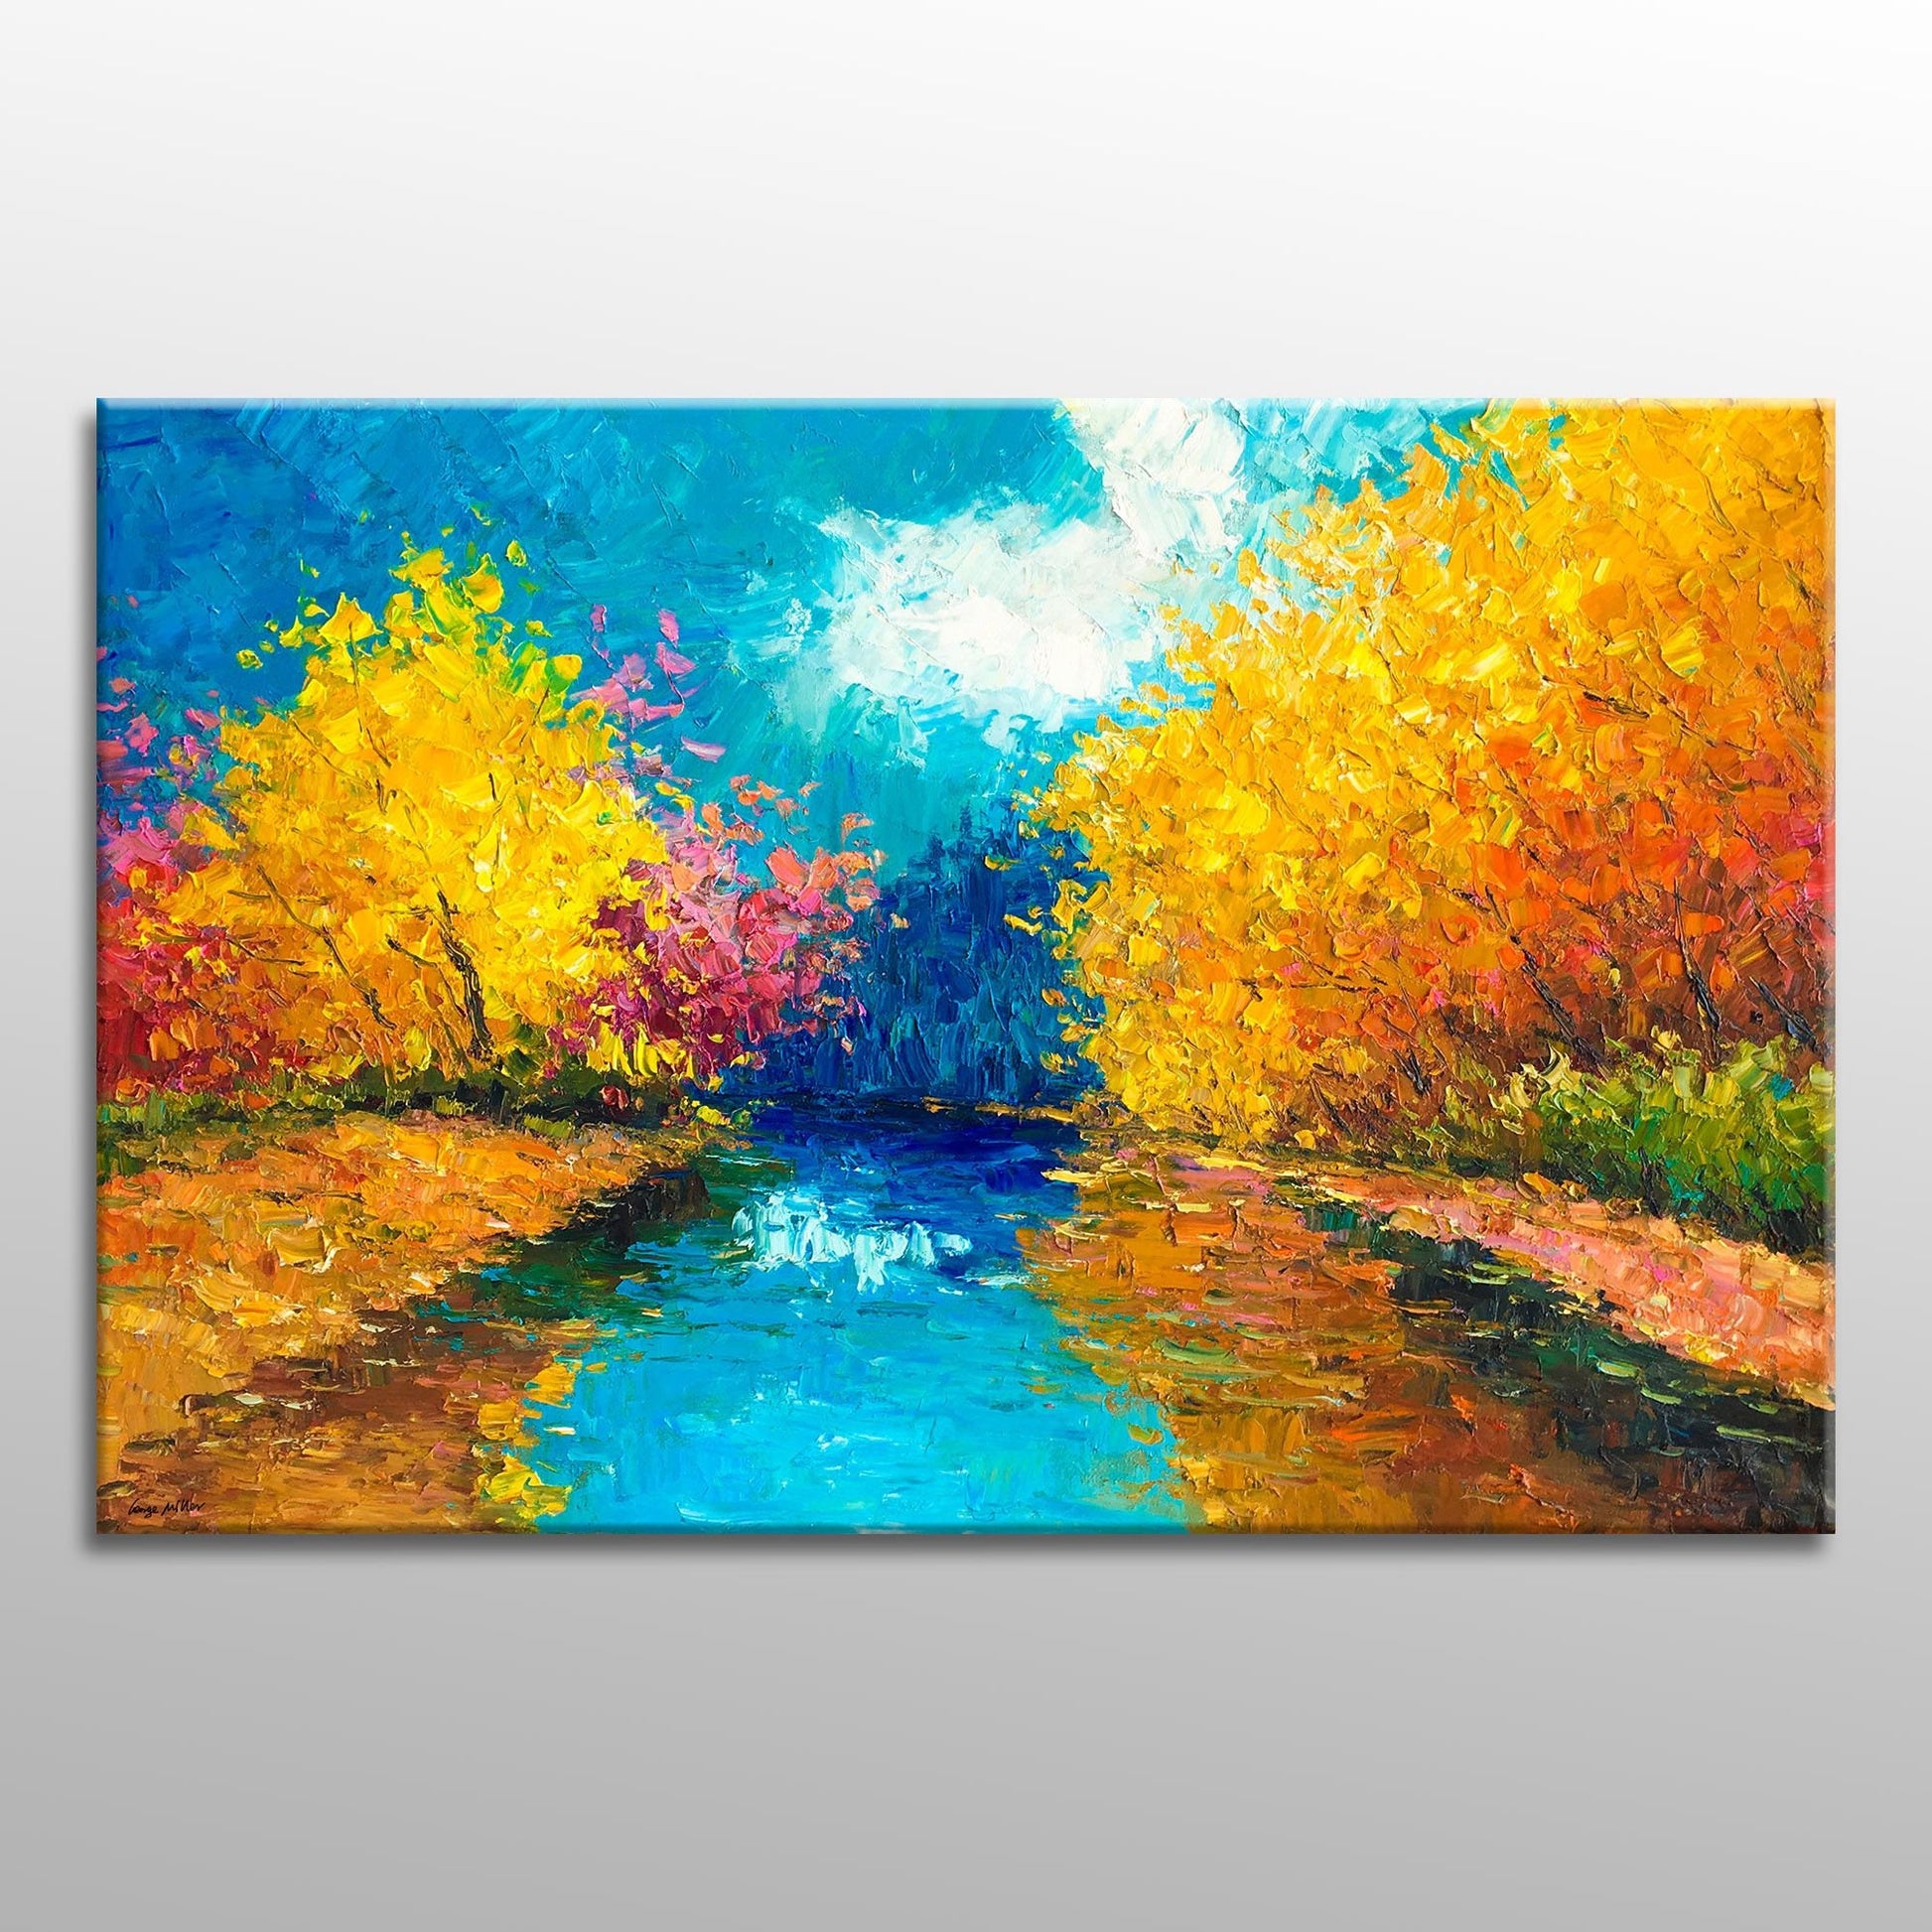 Oil Painting Landscape Autumn Forest Lake, Canvas Painting, Large Wall Art Painting, Large Landscape Painting, Modern Painting, Wall Decor